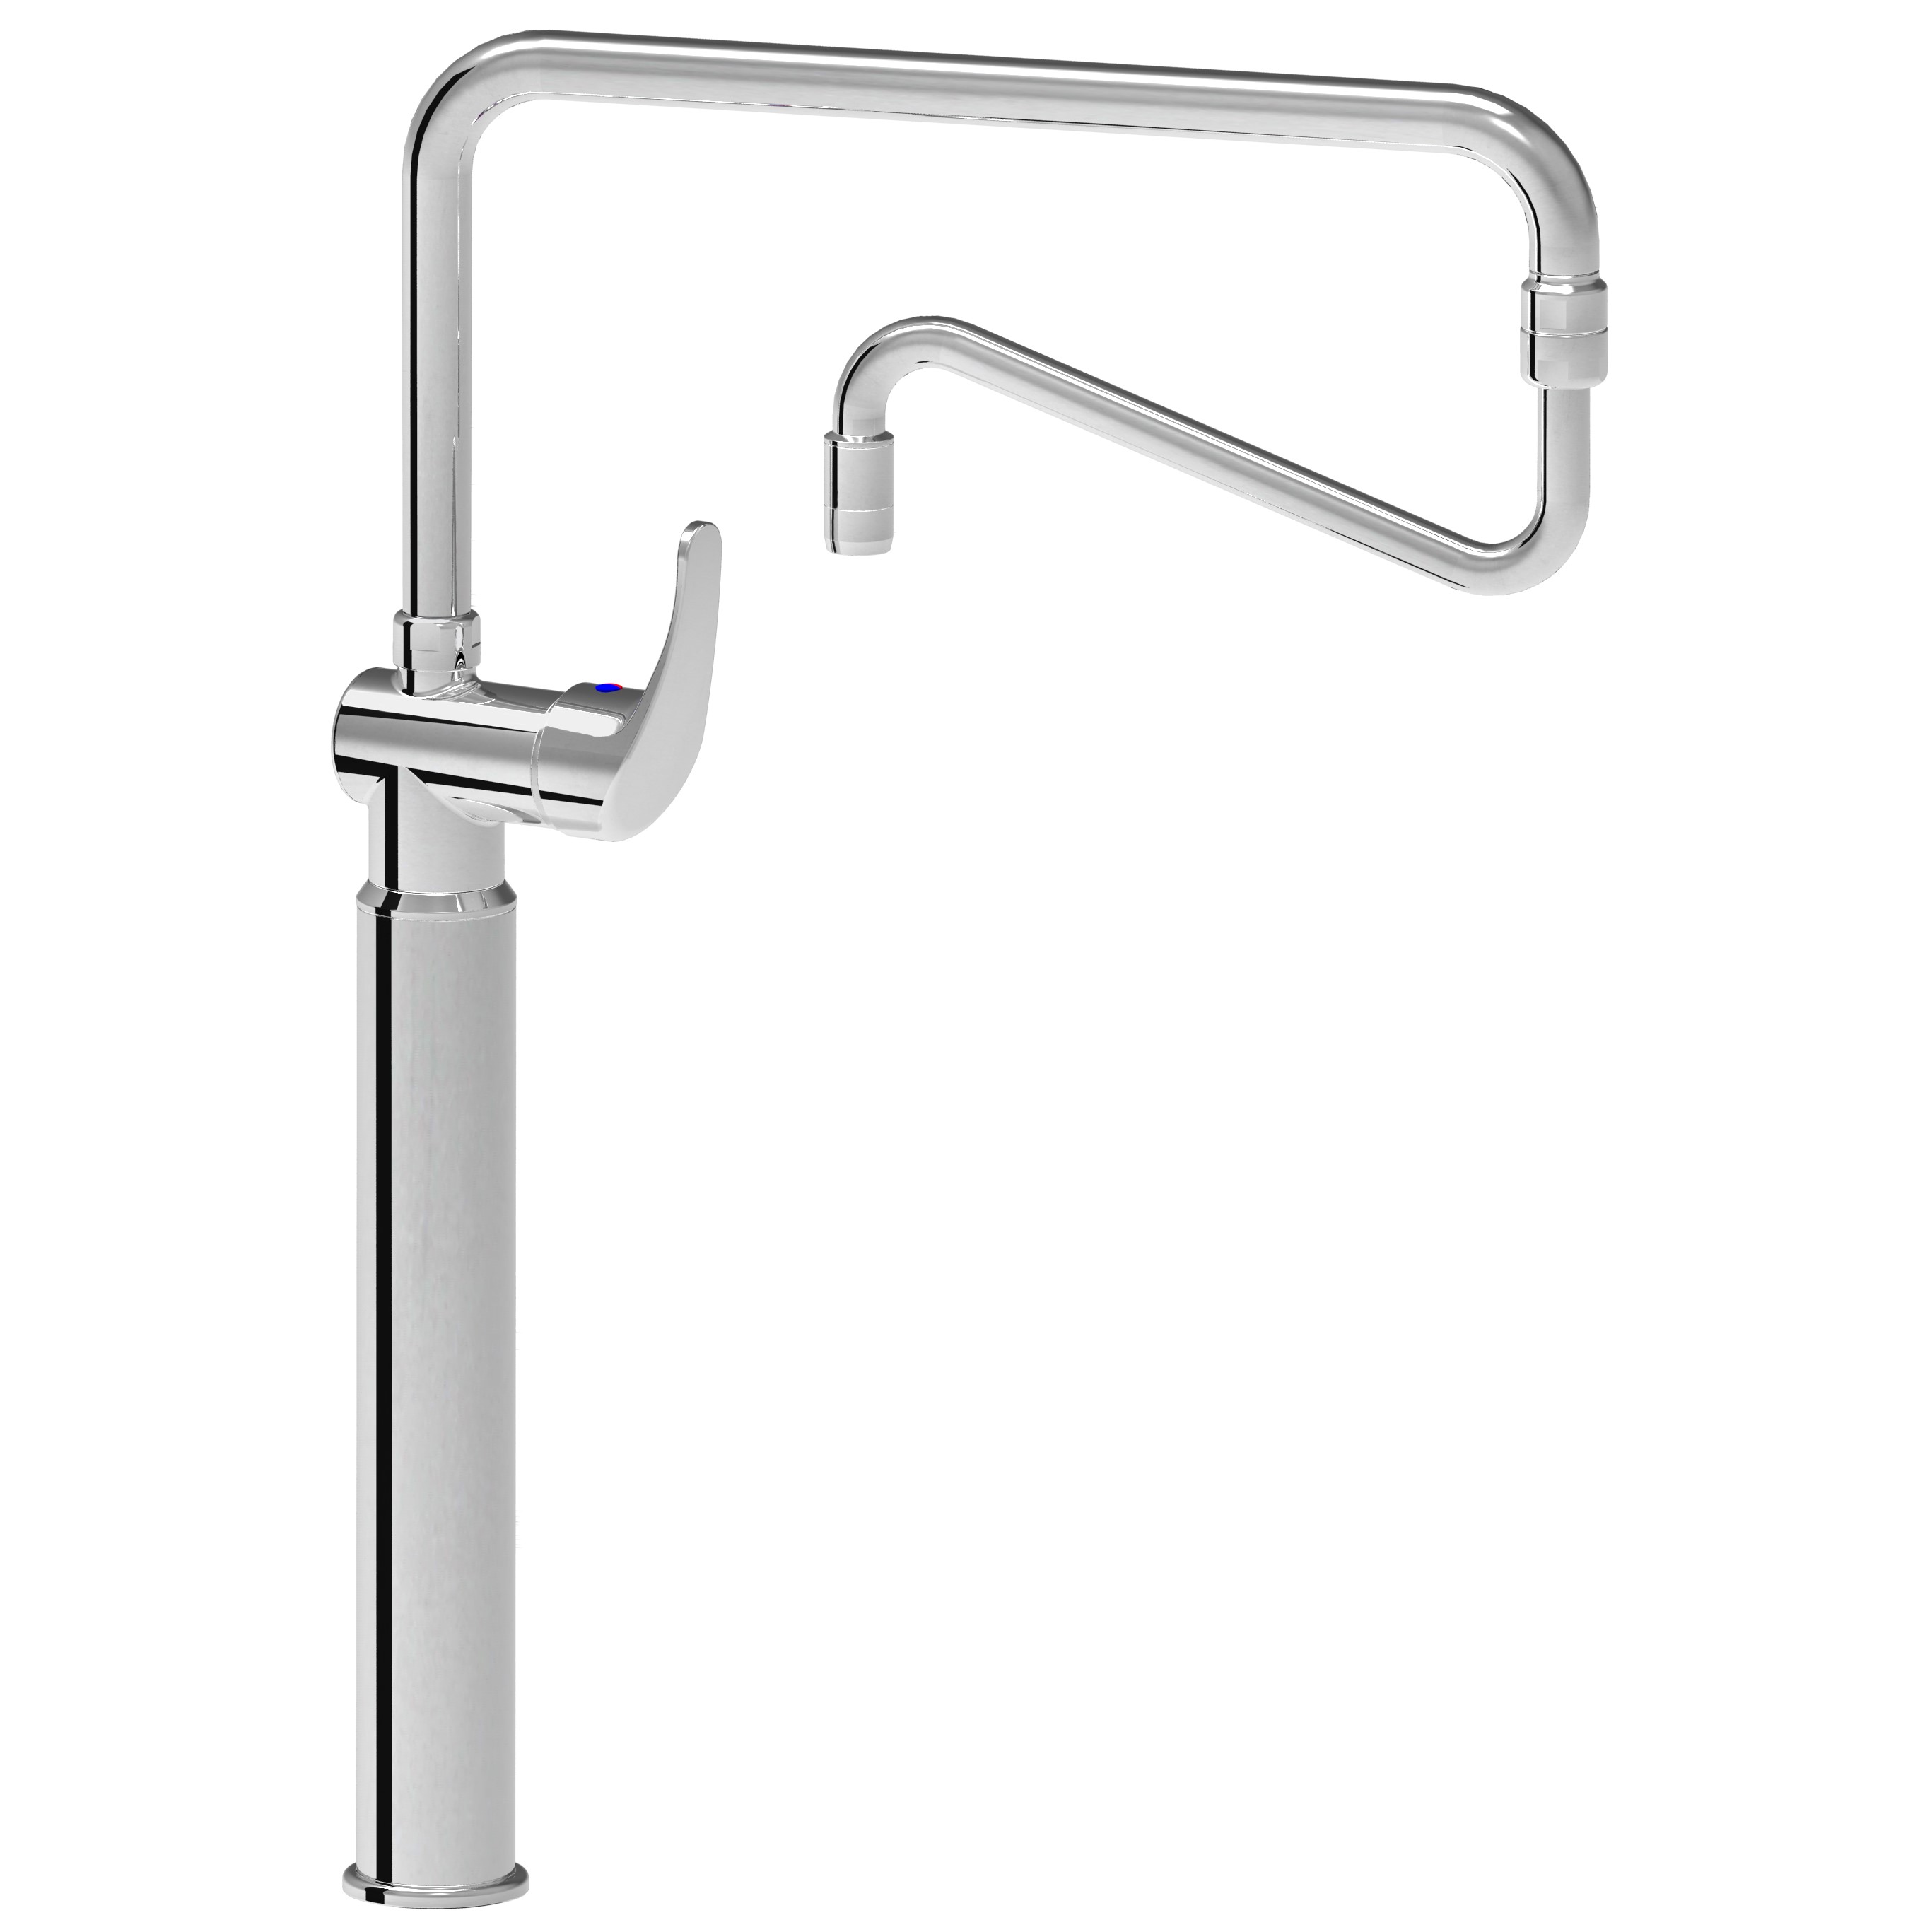 Monoblock single short lever mixer tap type with long base